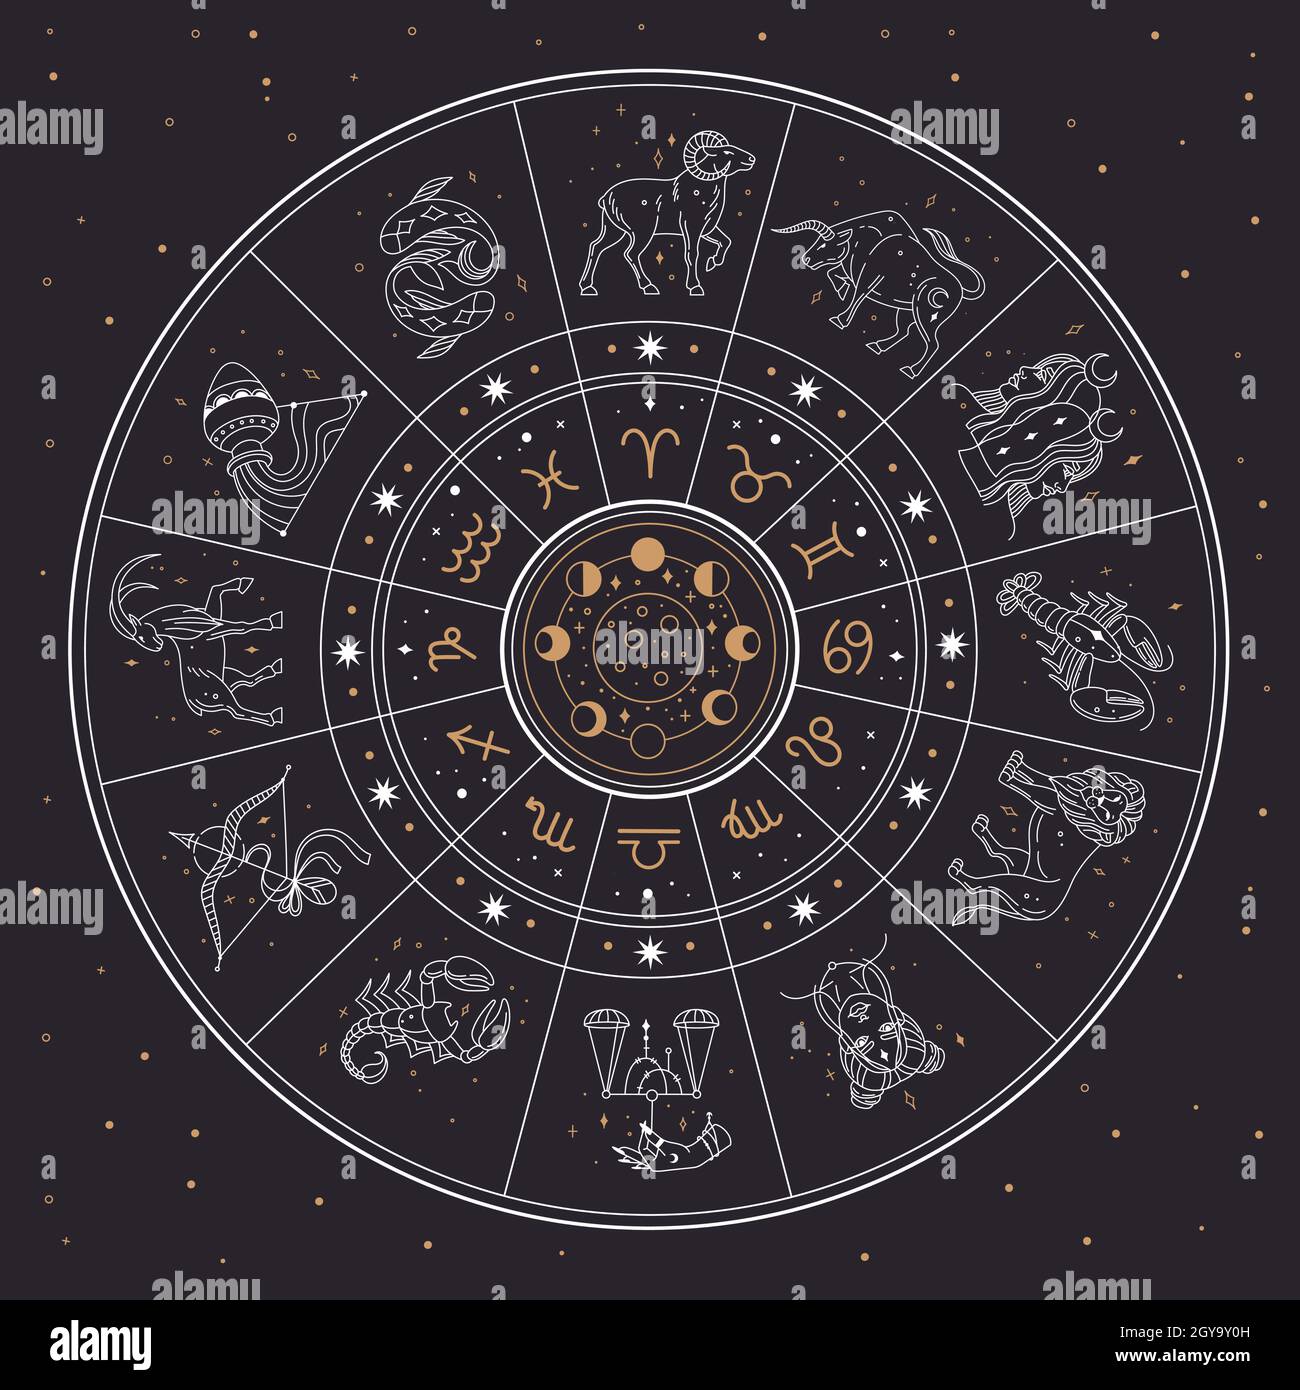 Horoscope astrology circle with zodiac signs and constellations. Gemini, cancer, lion, mystic zodiacal sign collection vector illustration. Calendar with different moon phases in night sky Stock Vector